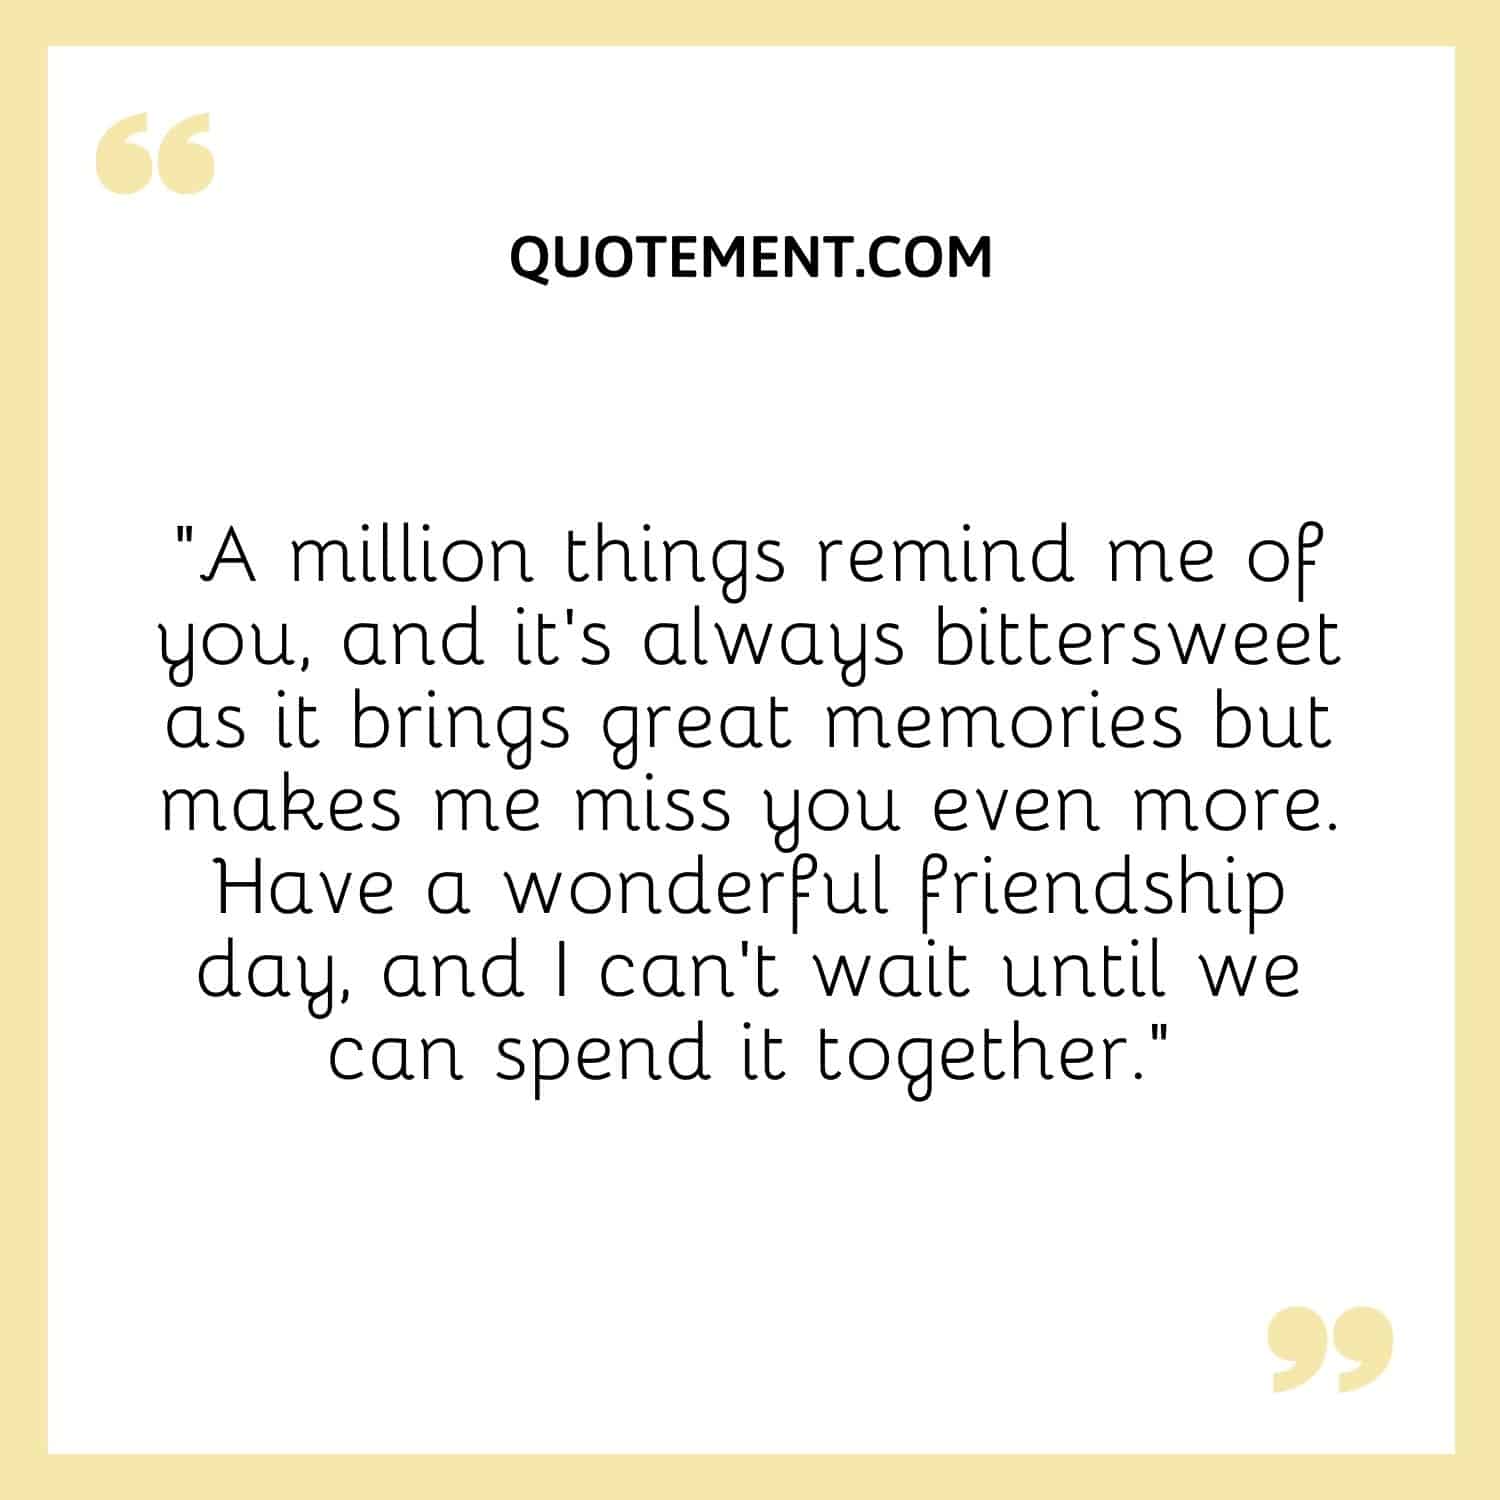 “A million things remind me of you, and it’s always bittersweet as it brings great memories but makes me miss you even more. Have a wonderful friendship day, and I can’t wait until we can spend it together.”